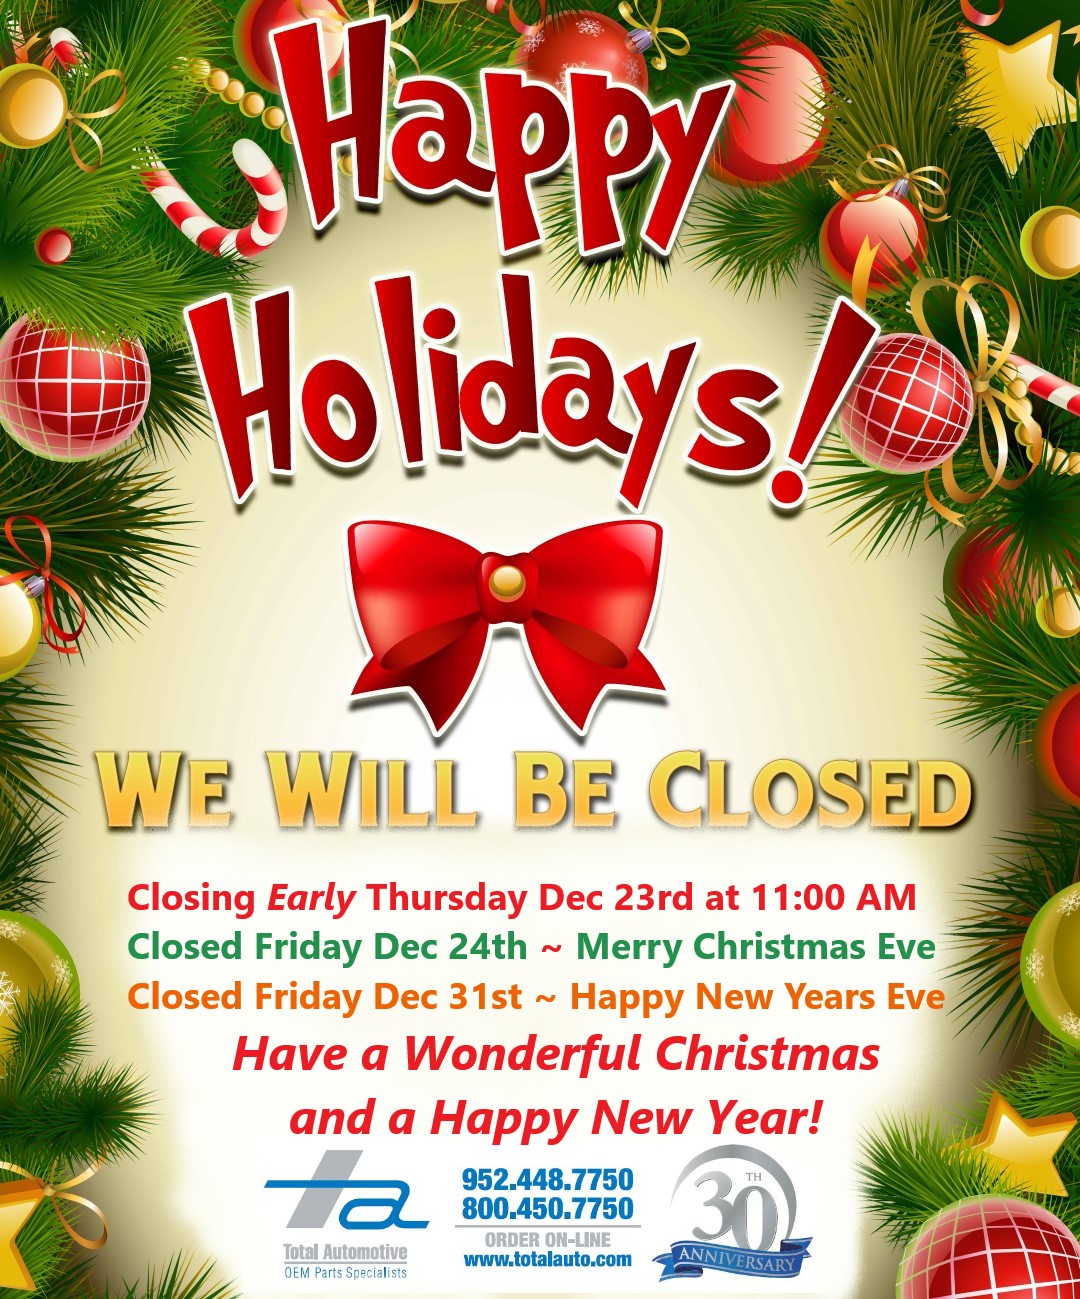 Merry Christmas and Happy New Year ~ Holiday Hours